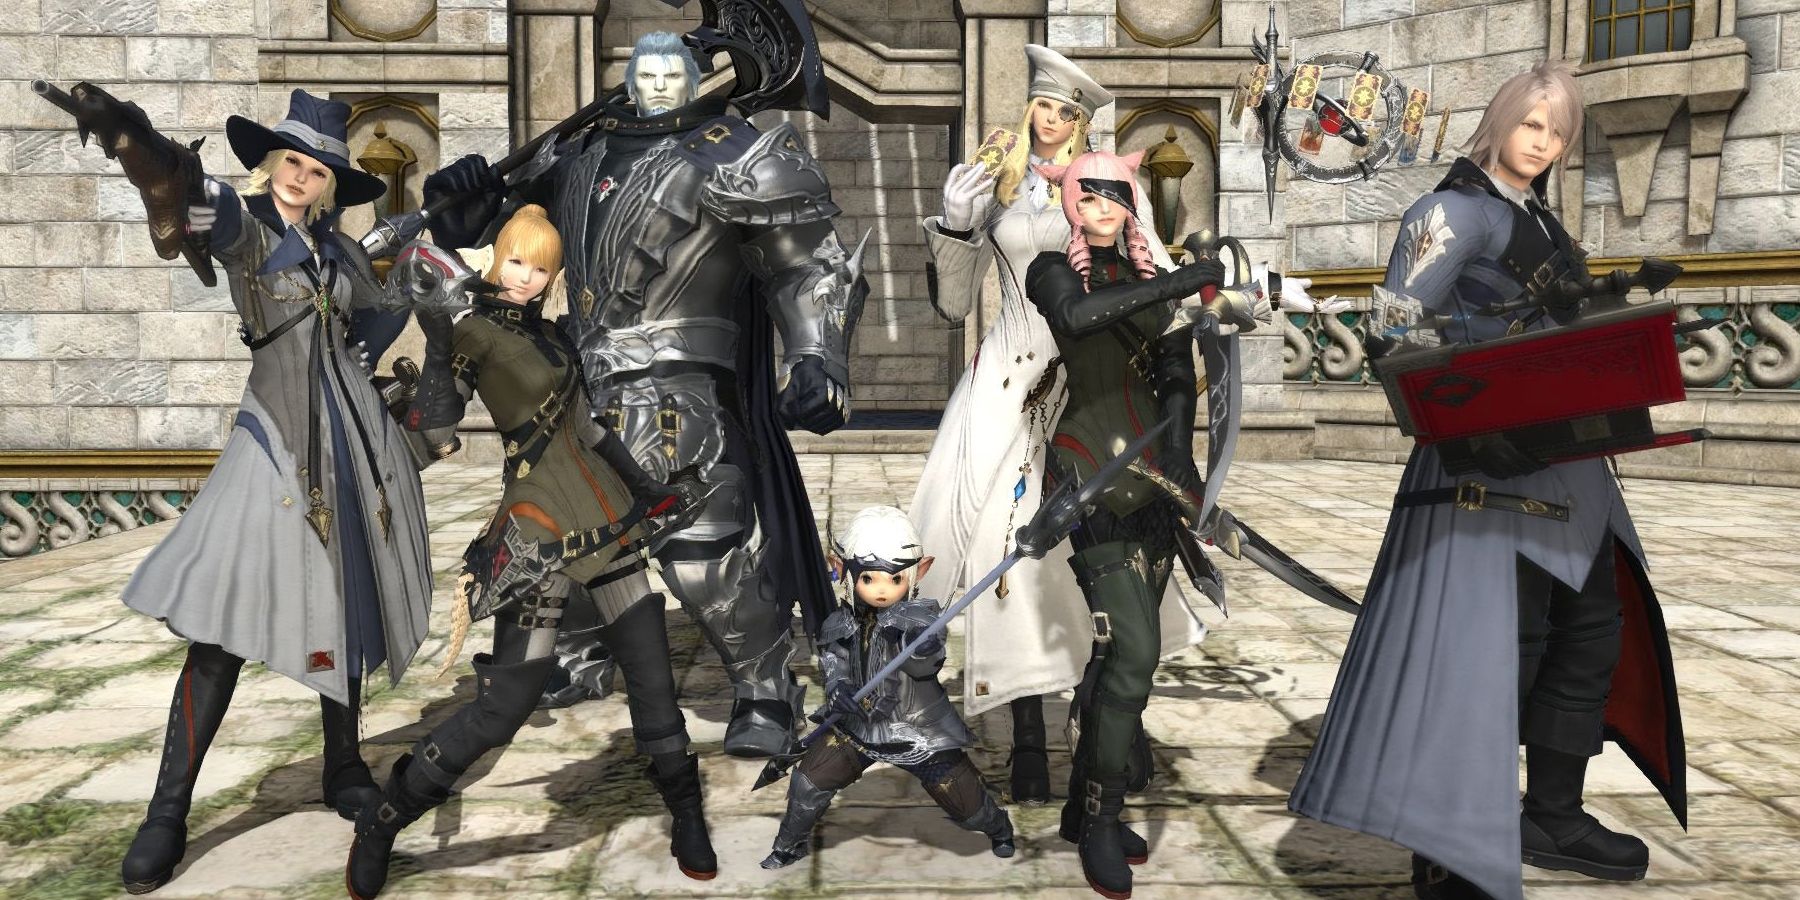 Shire weapons and armor in Final Fantasy XIV